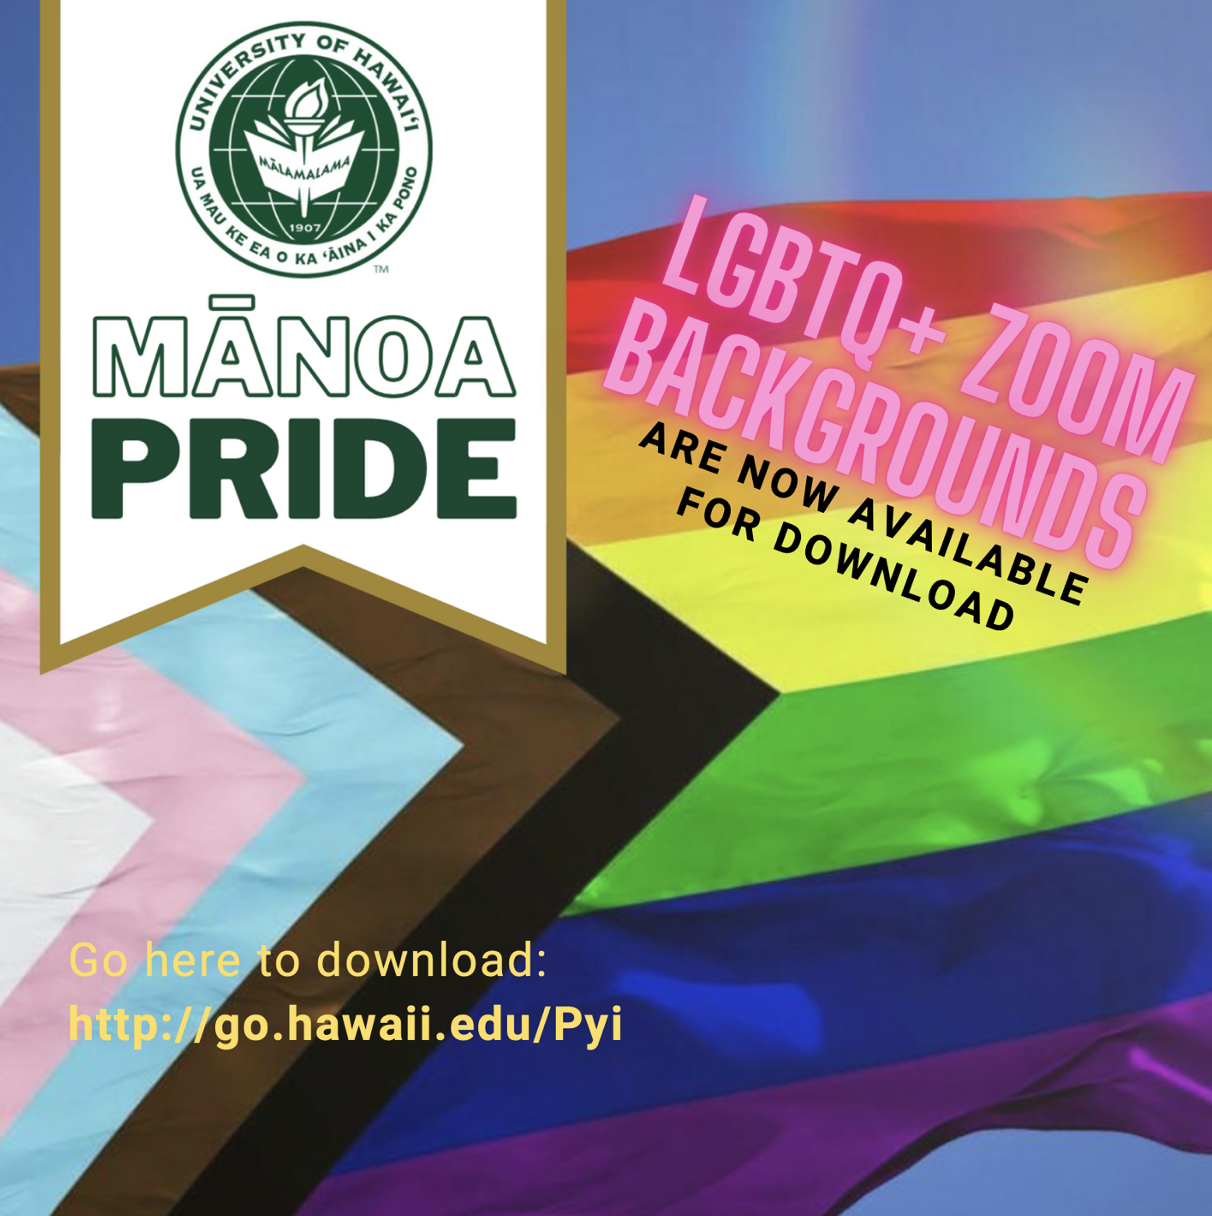 Manoa Pride backgrounds available for download - rainbow colors screen shot